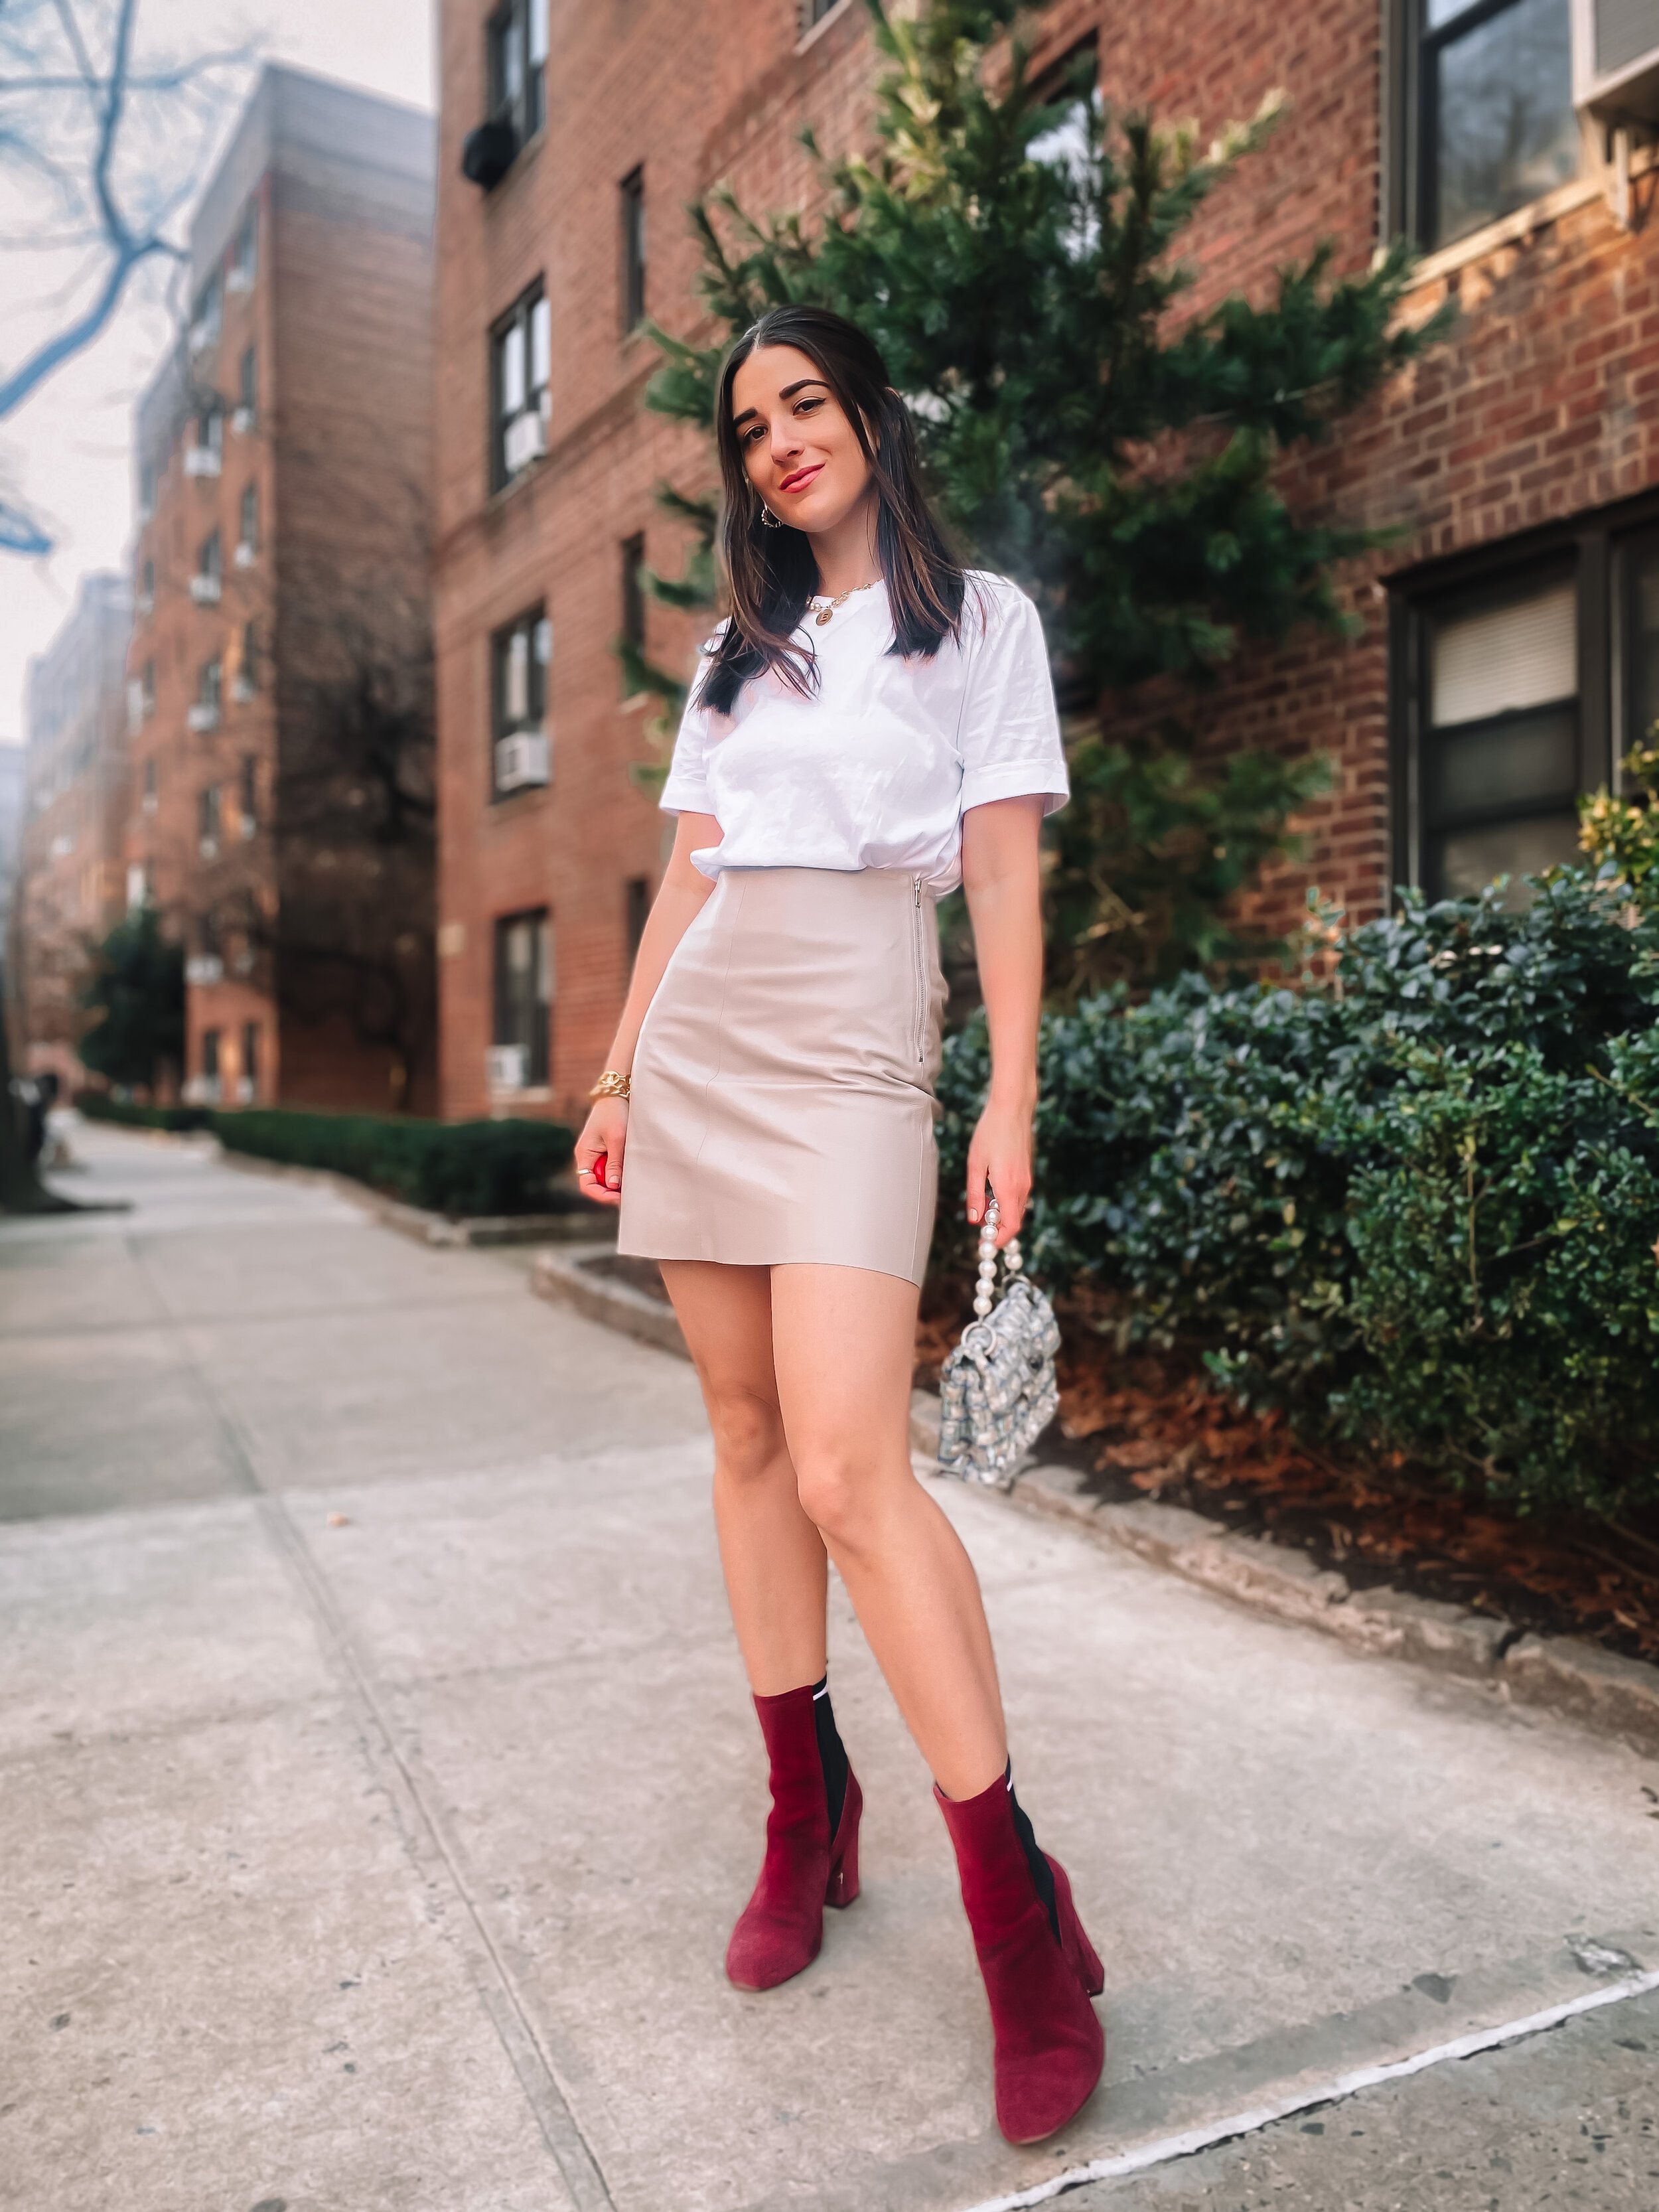 OOTD Bodysuit T-Shirt Leather Mini Boyfriend Tee WeWoreWhat Macy's Red Velvet Boots Pleather Skirt COS Tweed Bag Kurt Geiger Fall Fashion Street Style Esther Santer NYC Blogger Gold Jewelry Necklaces Bracelets Accessories Shop Buy Women Street Style.JPG